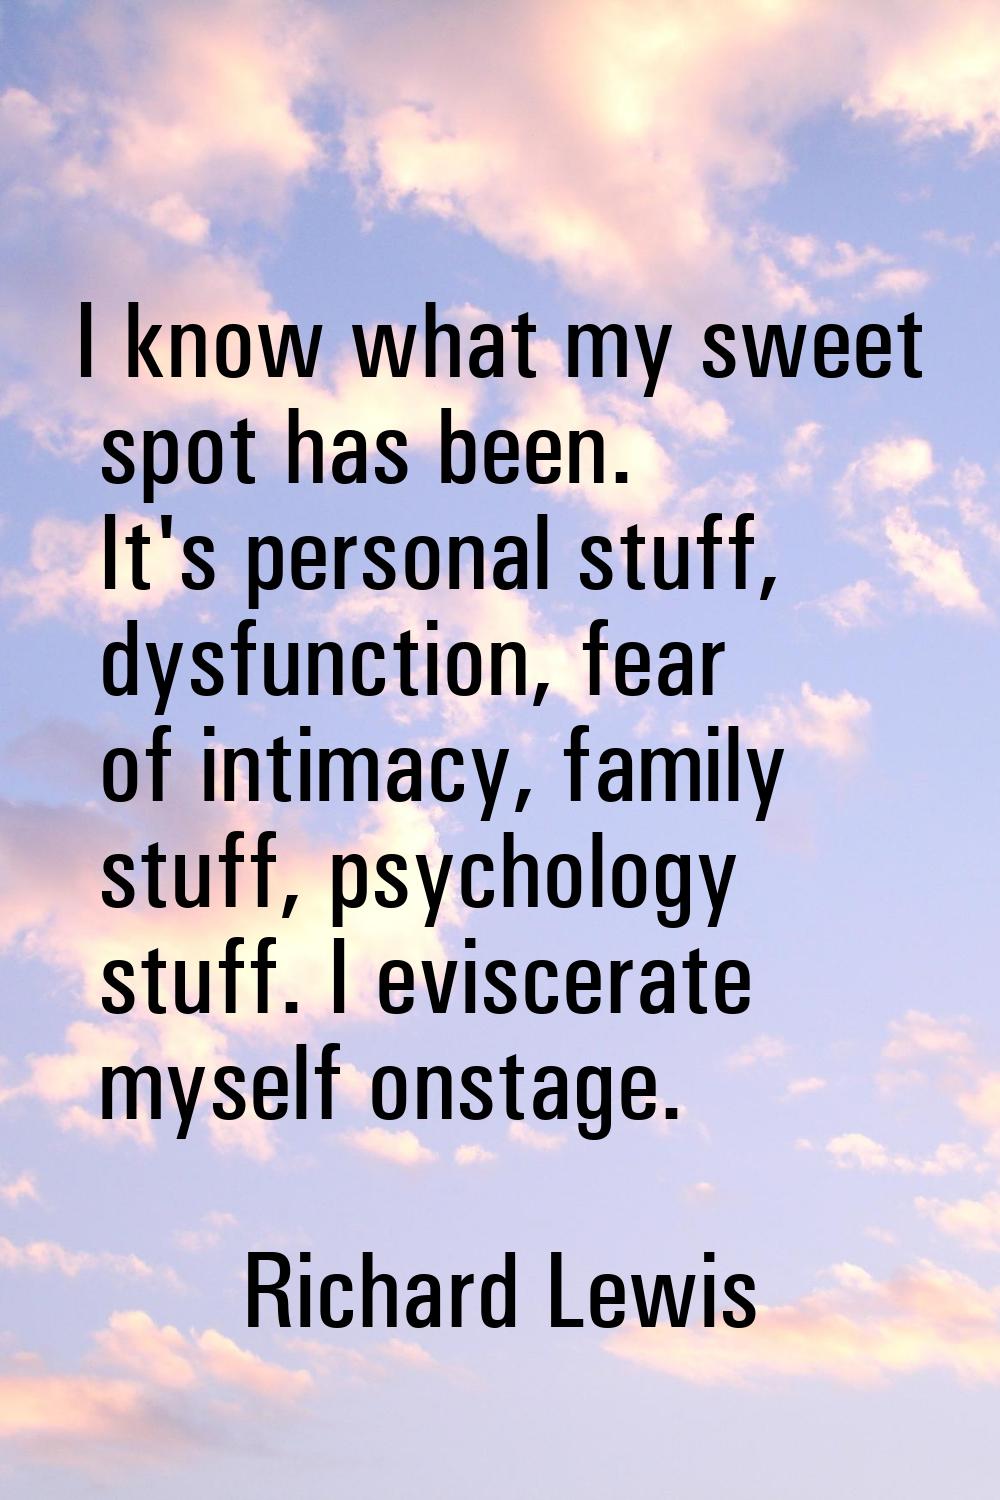 I know what my sweet spot has been. It's personal stuff, dysfunction, fear of intimacy, family stuf